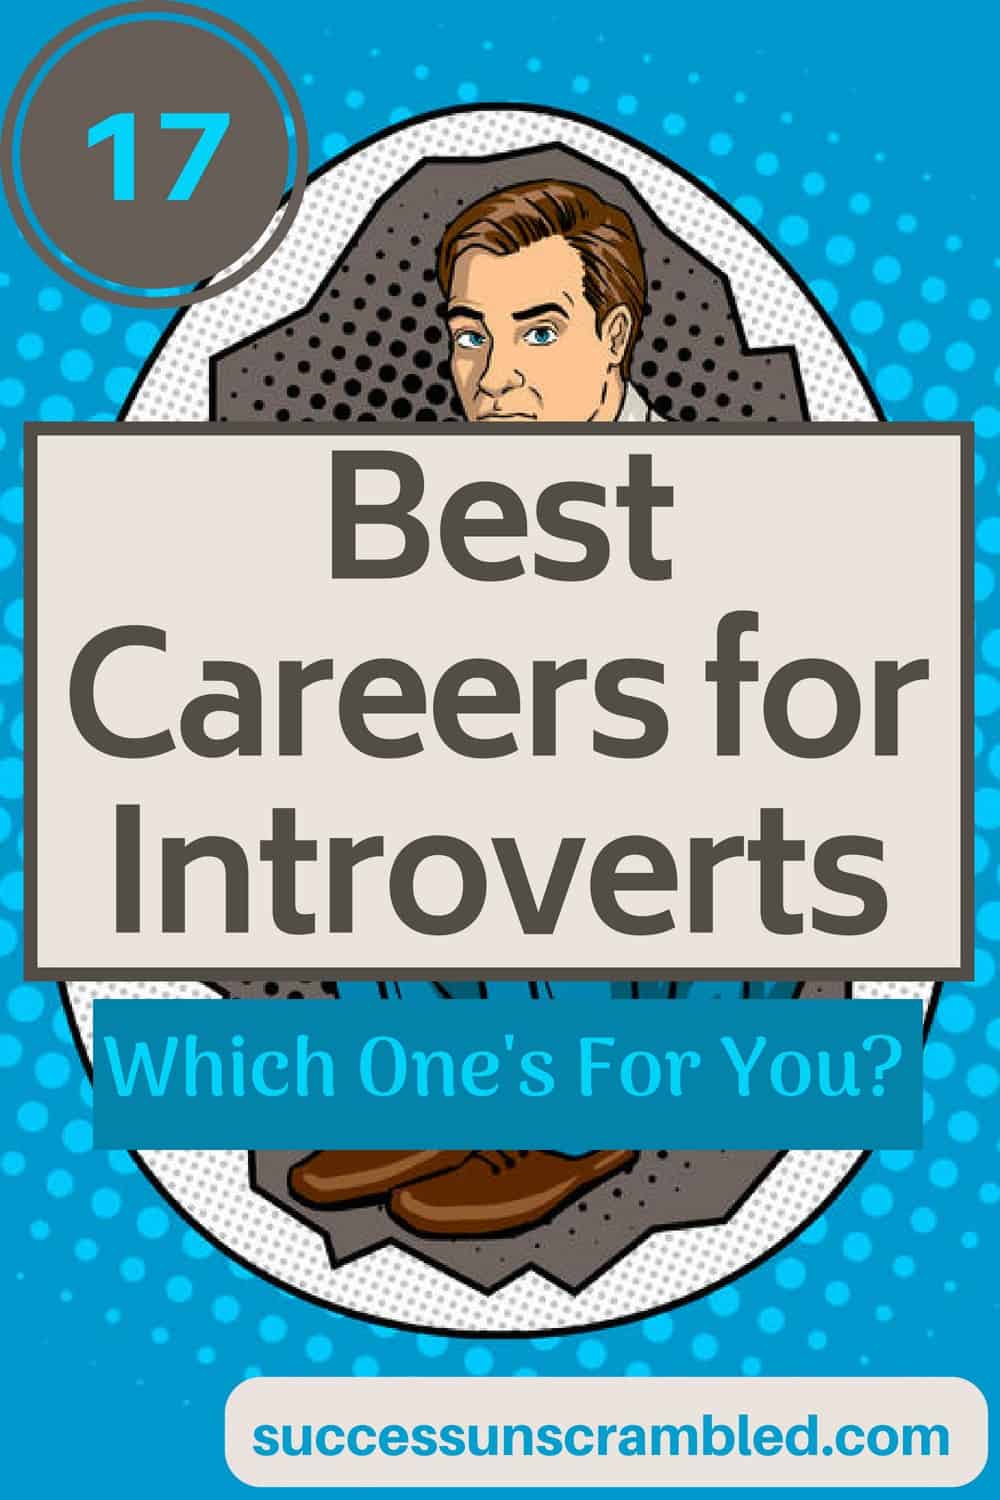 Pin with text "17 Best Careers for Introverts on LinkedIn" 